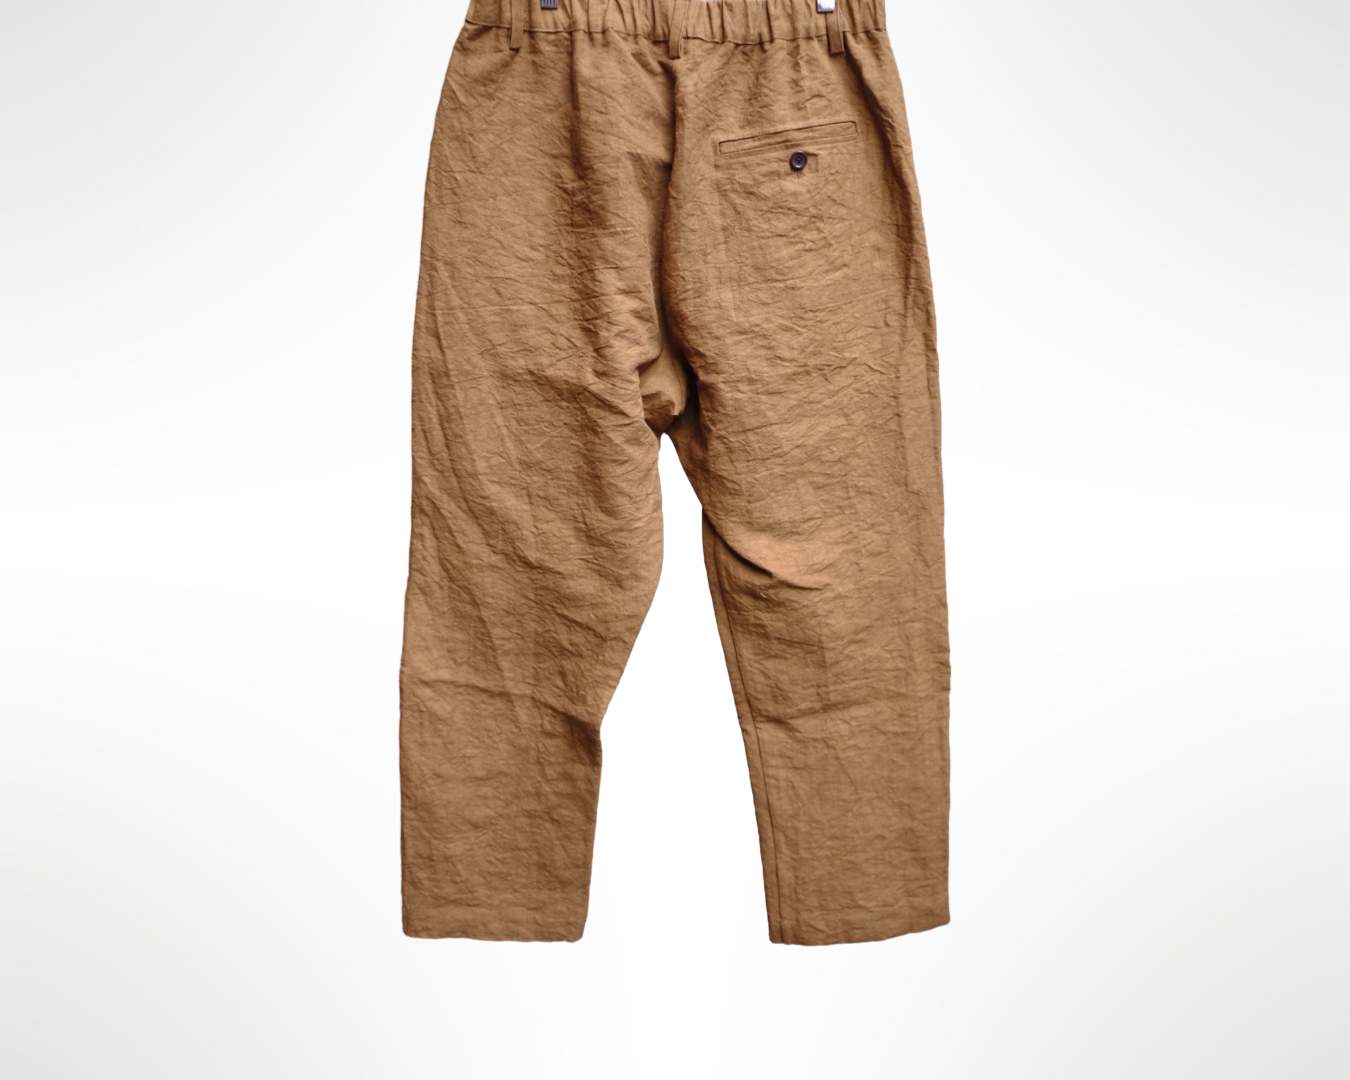 work pants in persimmon dyed paper/linen